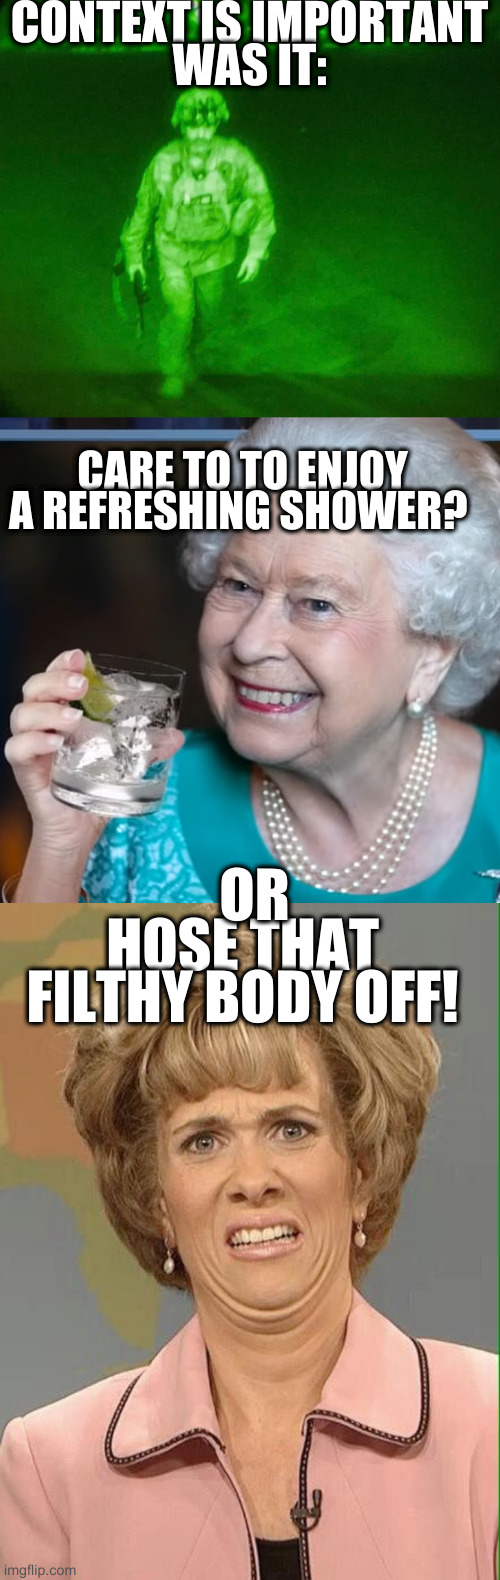 why would someone tell you to shower | CONTEXT IS IMPORTANT
WAS IT: CARE TO TO ENJOY A REFRESHING SHOWER? HOSE THAT FILTHY BODY OFF! OR | image tagged in last loser,drinky-poo,eww | made w/ Imgflip meme maker